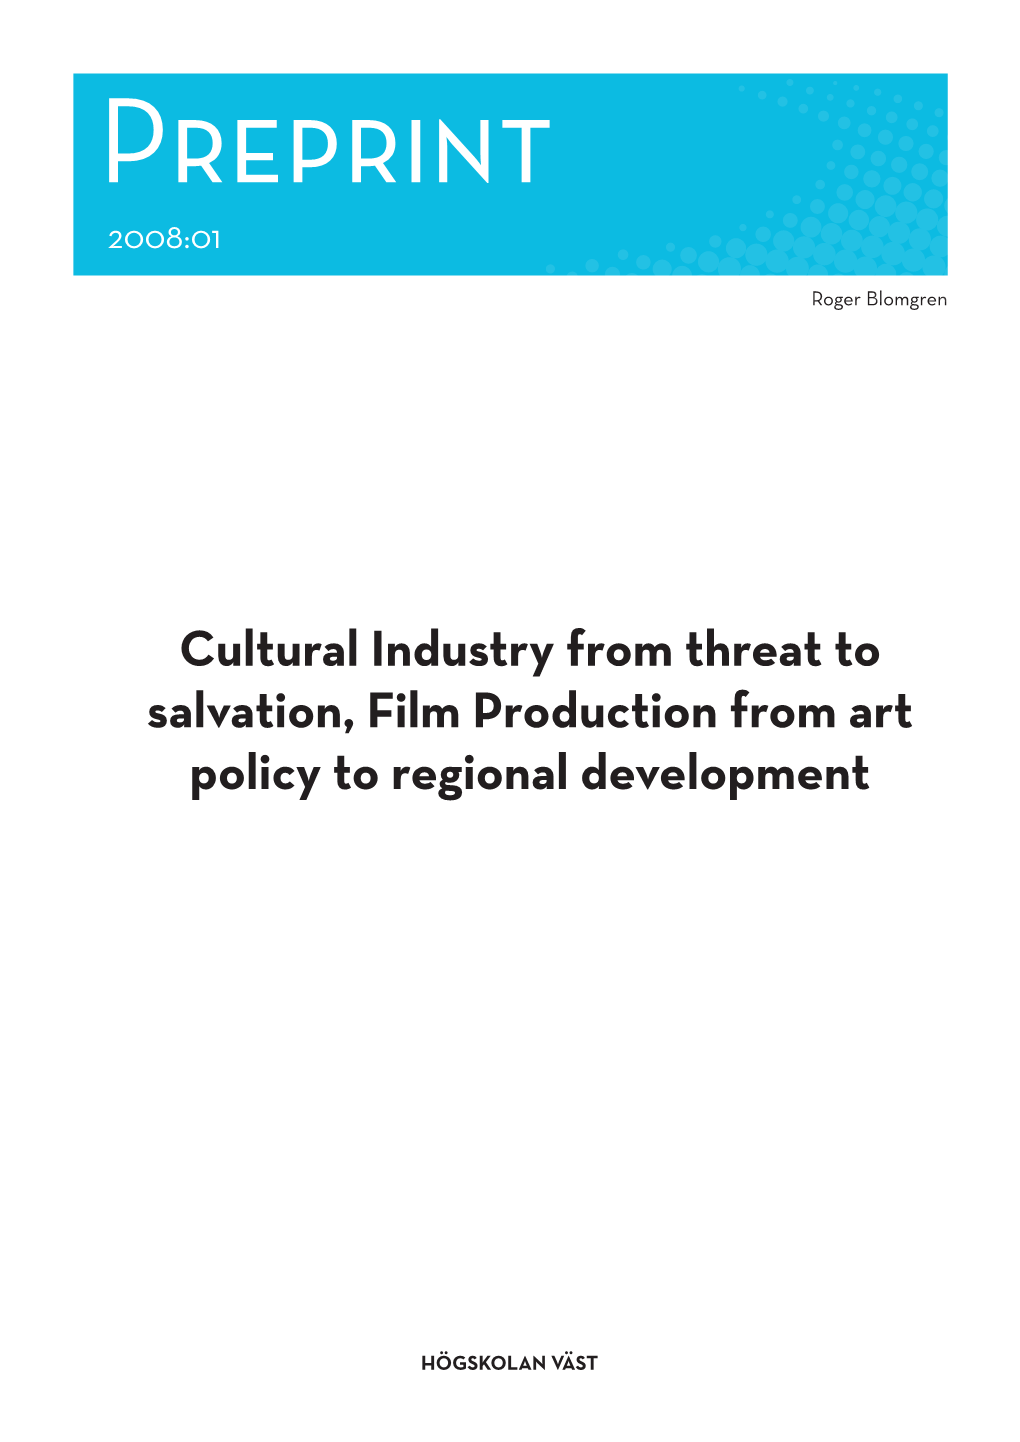 Cultural Industry from Threat to Salvation, Film Production from Art Policy to Regional Development